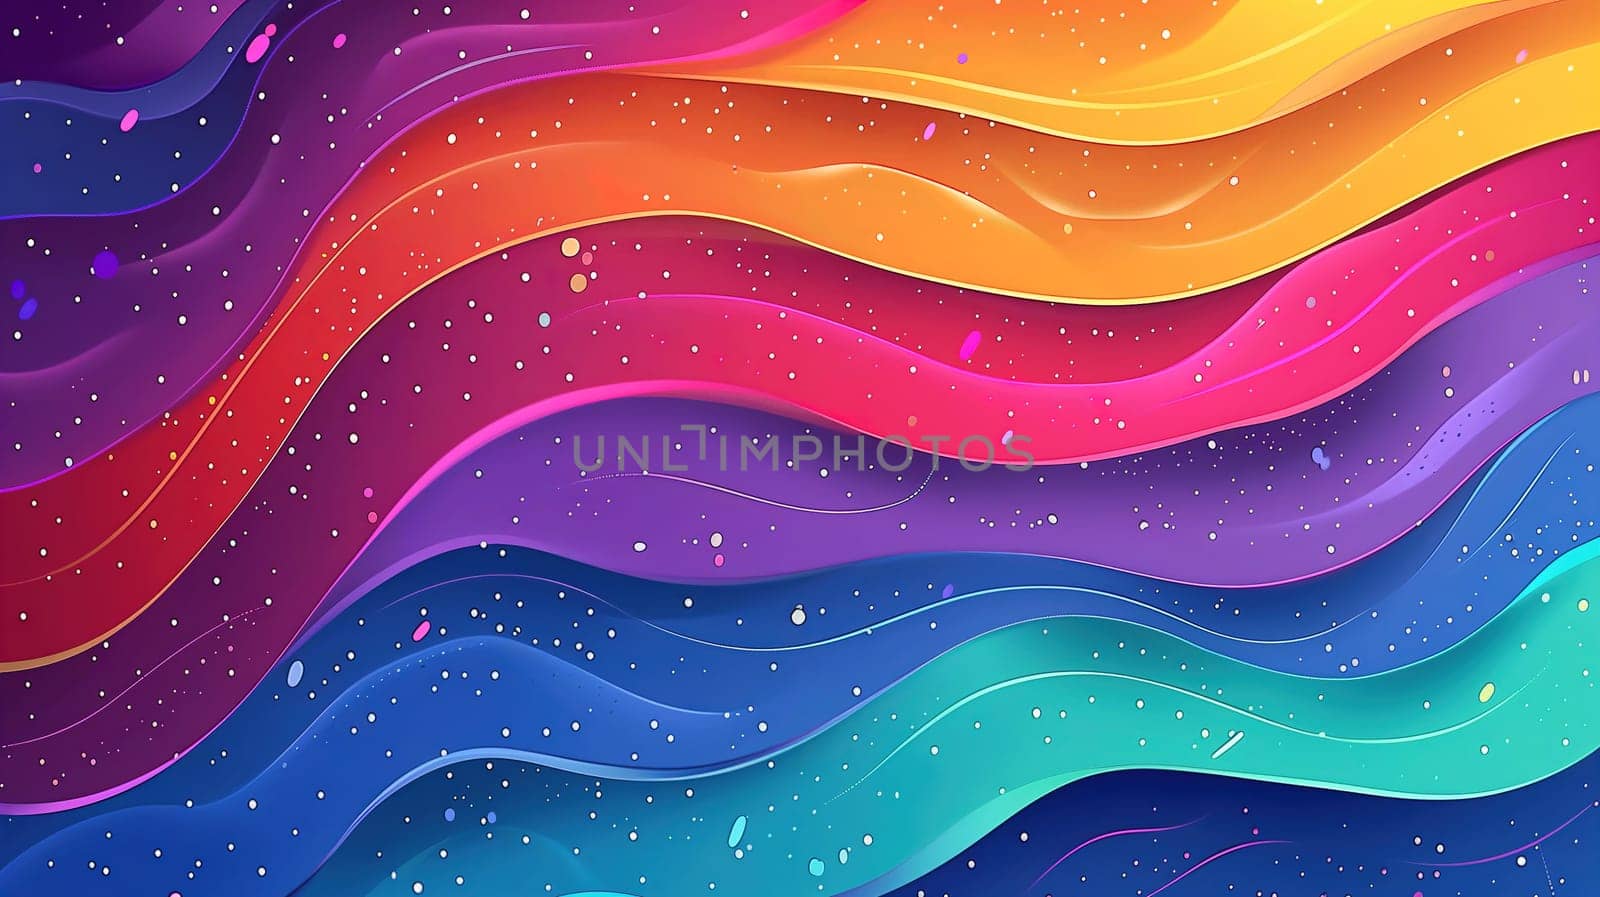 A dynamic and colorful background captures the essence of LGBT pride with waves of rainbow colors flowing across the canvas. The spectrum of hues represents diversity and inclusion, with a sprinkle of stardust-like speckles adding a magical touch to the overall design, celebrating equality and love.